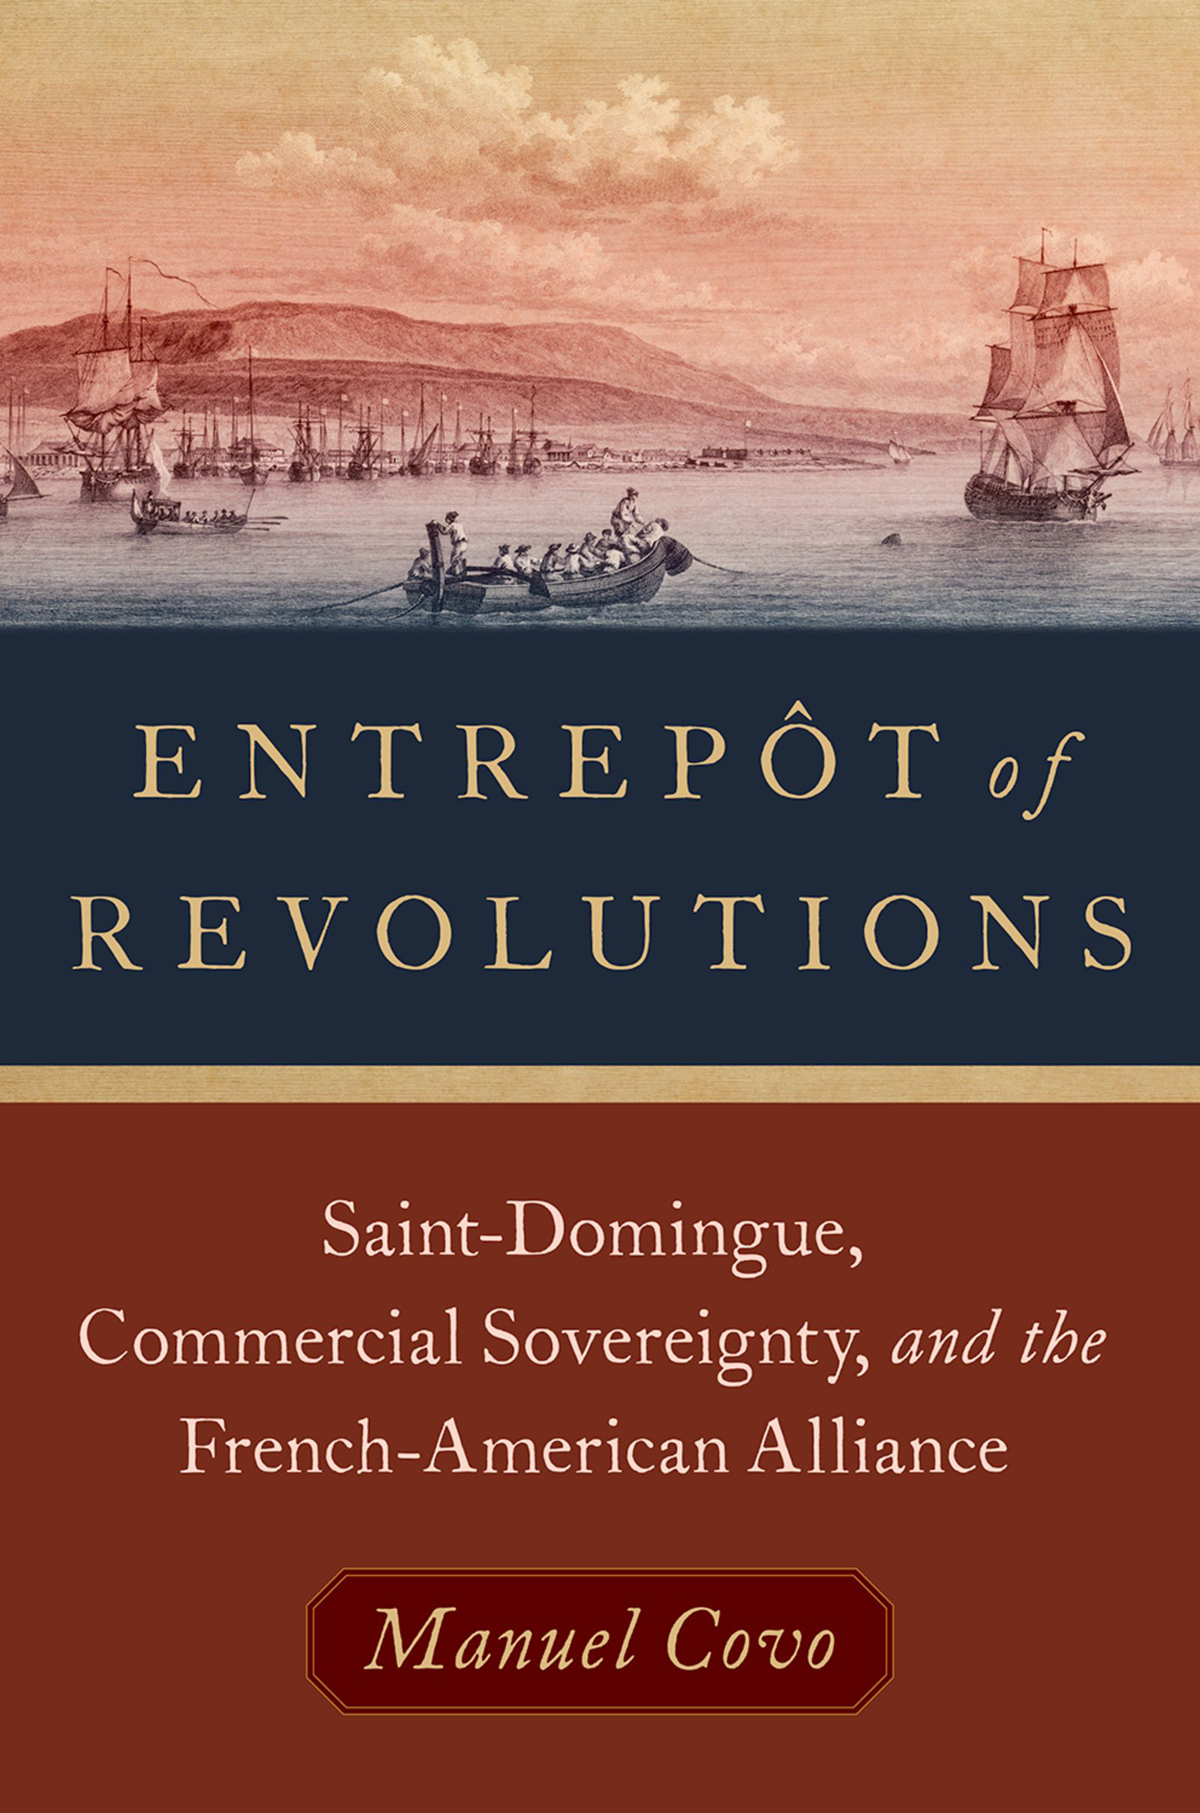 Entrept of Revolutions Saint-Domingue Commercial Sovereignty and the French-American Alliance - image 1